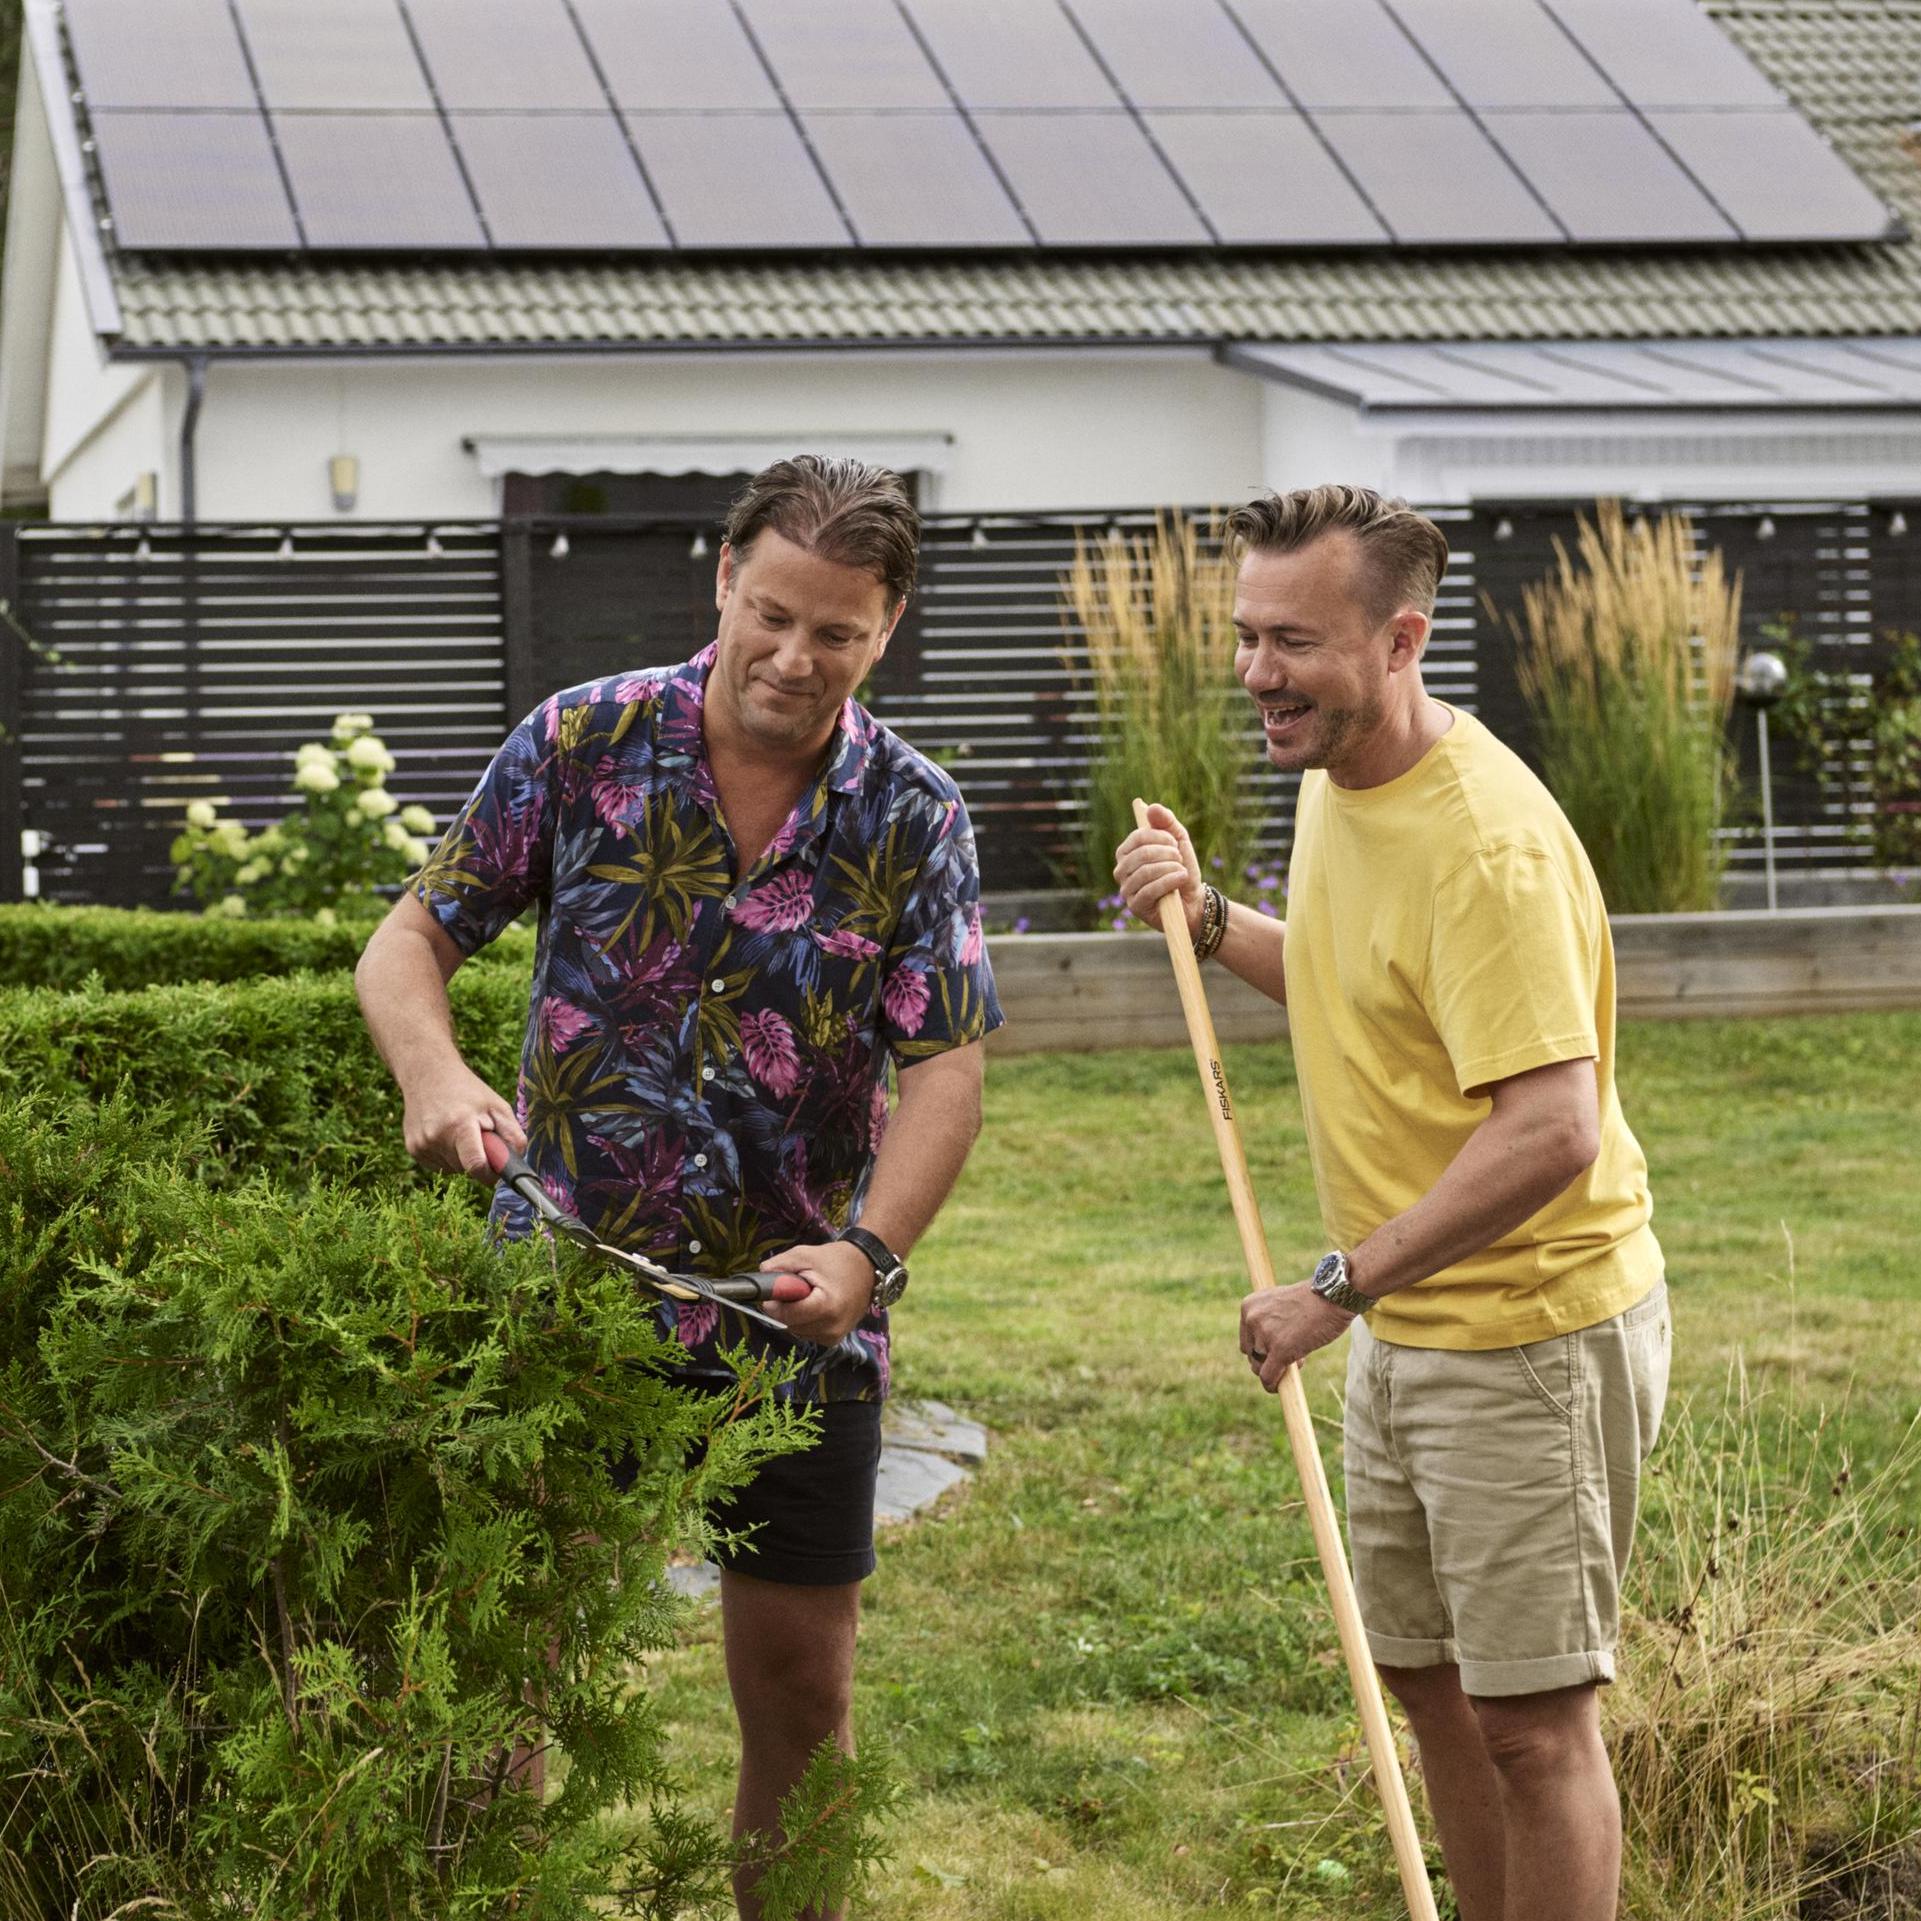 Two men gardening, trimming the hedge. Solar panels in the background